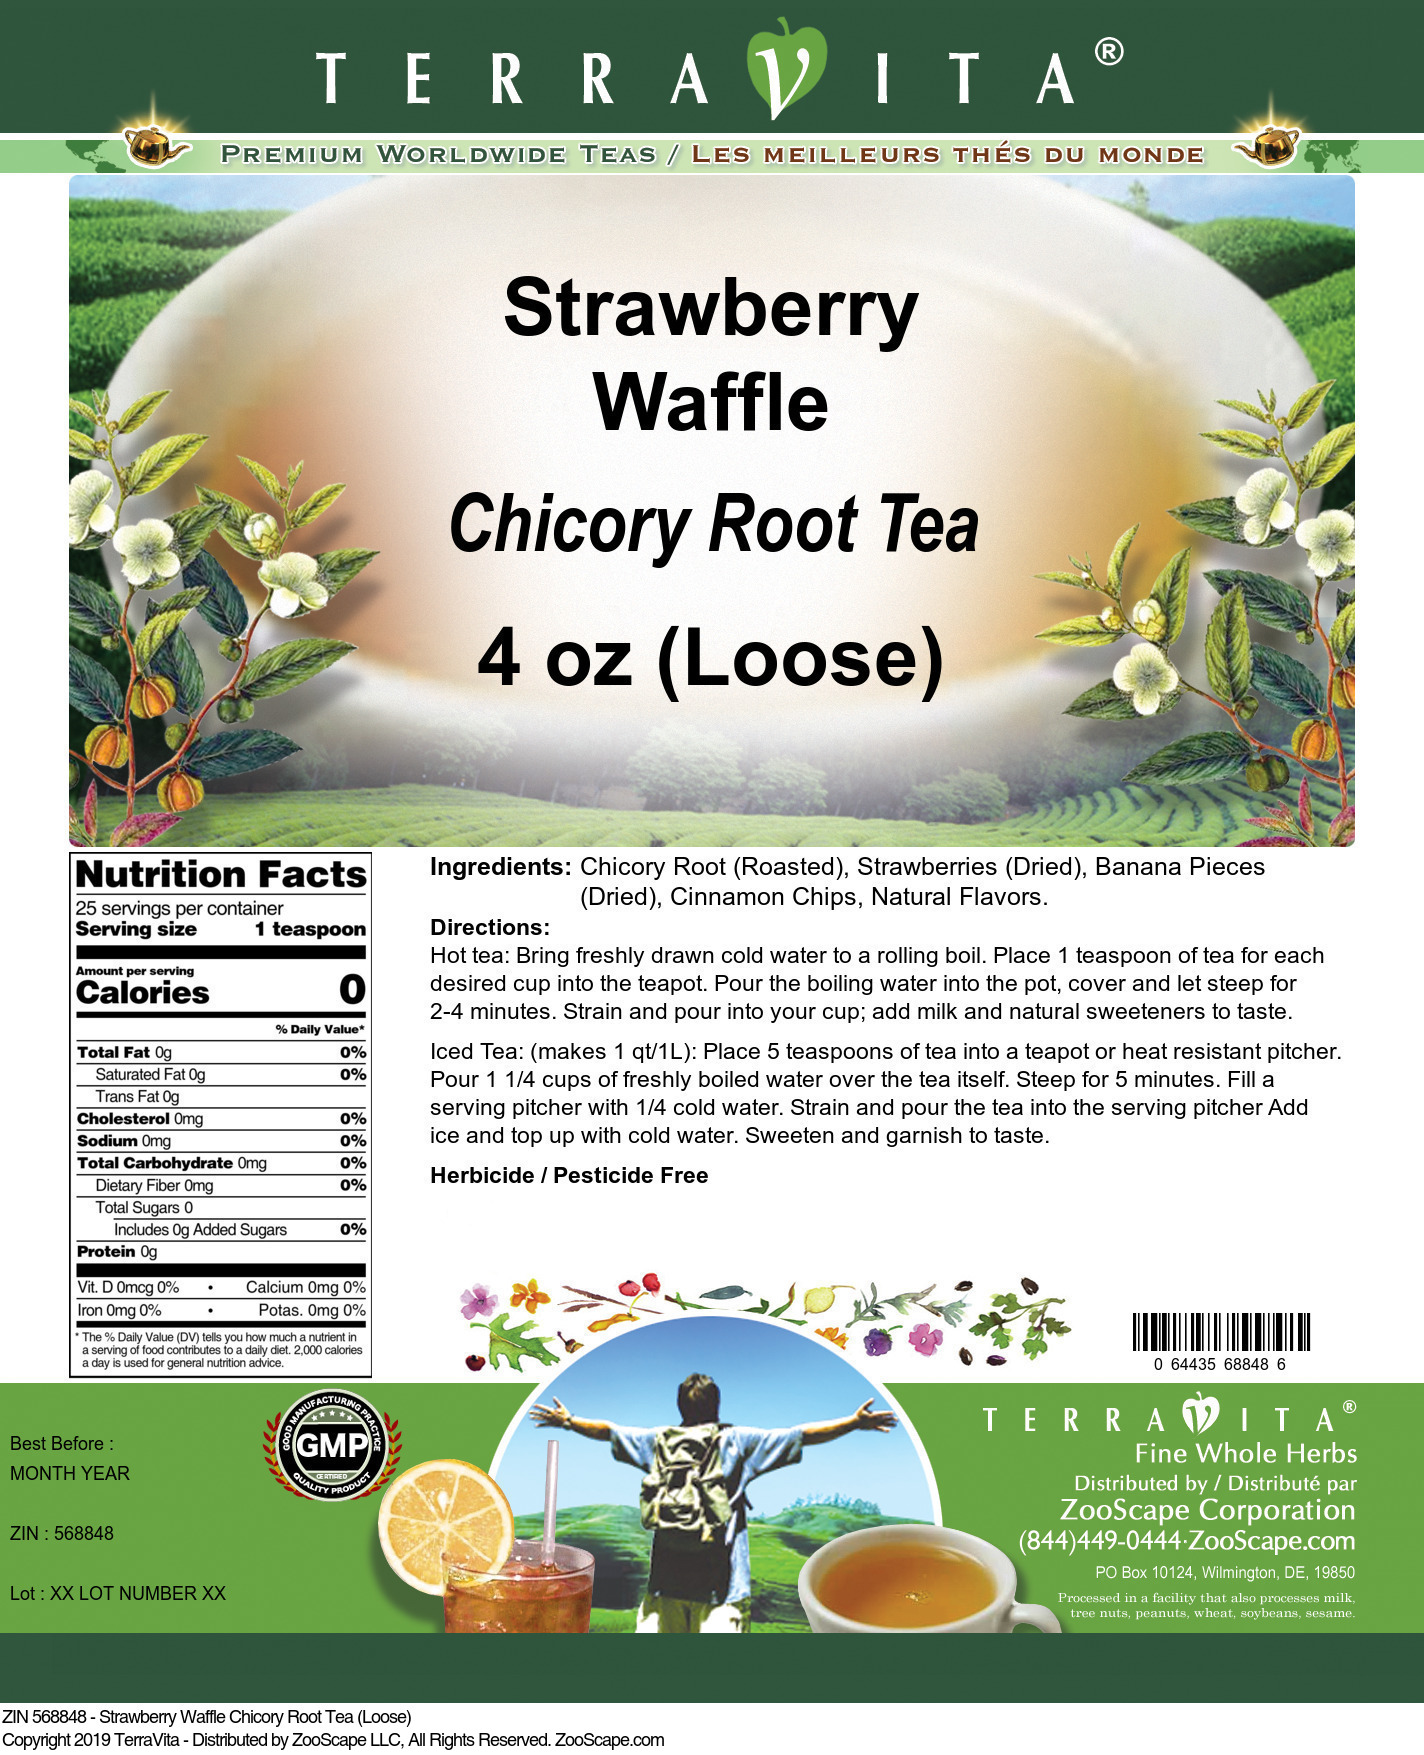 Strawberry Waffle Chicory Root Tea (Loose) - Label